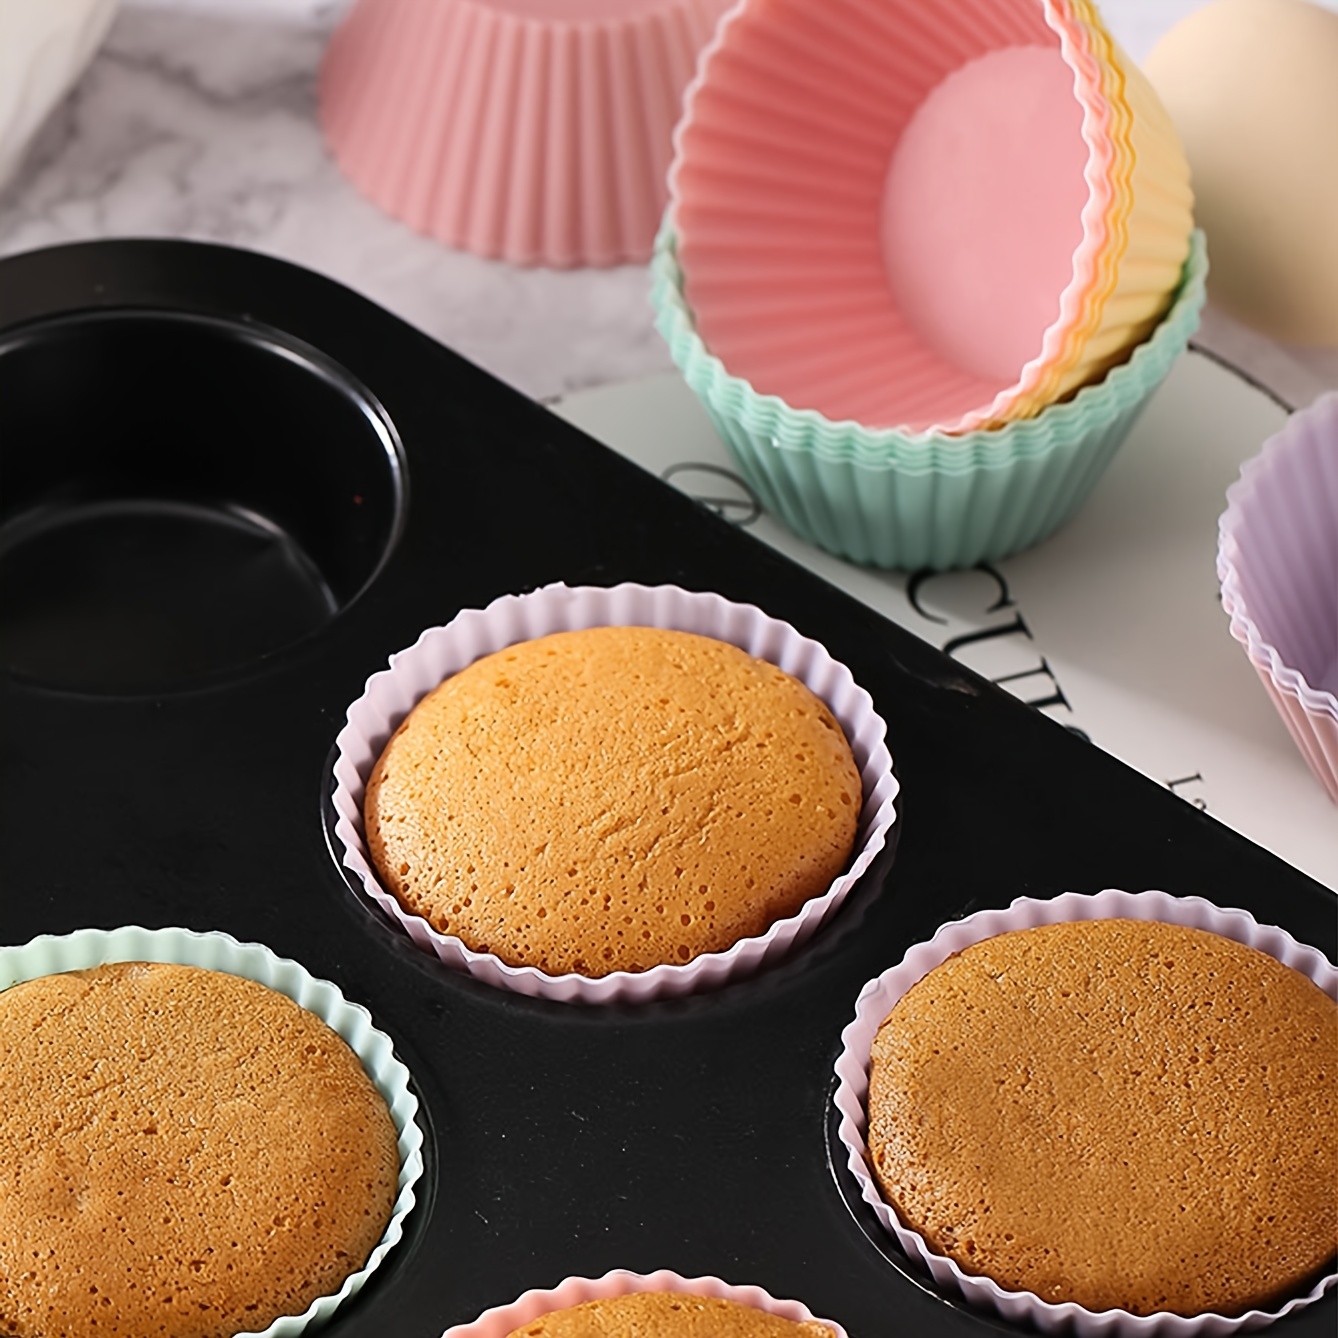 Dropship 12pcs/Set; Silicone Baking Cups; Reusable Cupcake Liners; Home  Cake Molds; Standard Size Muffin Liners; Baking Tools; Kitchen Gadgets to  Sell Online at a Lower Price